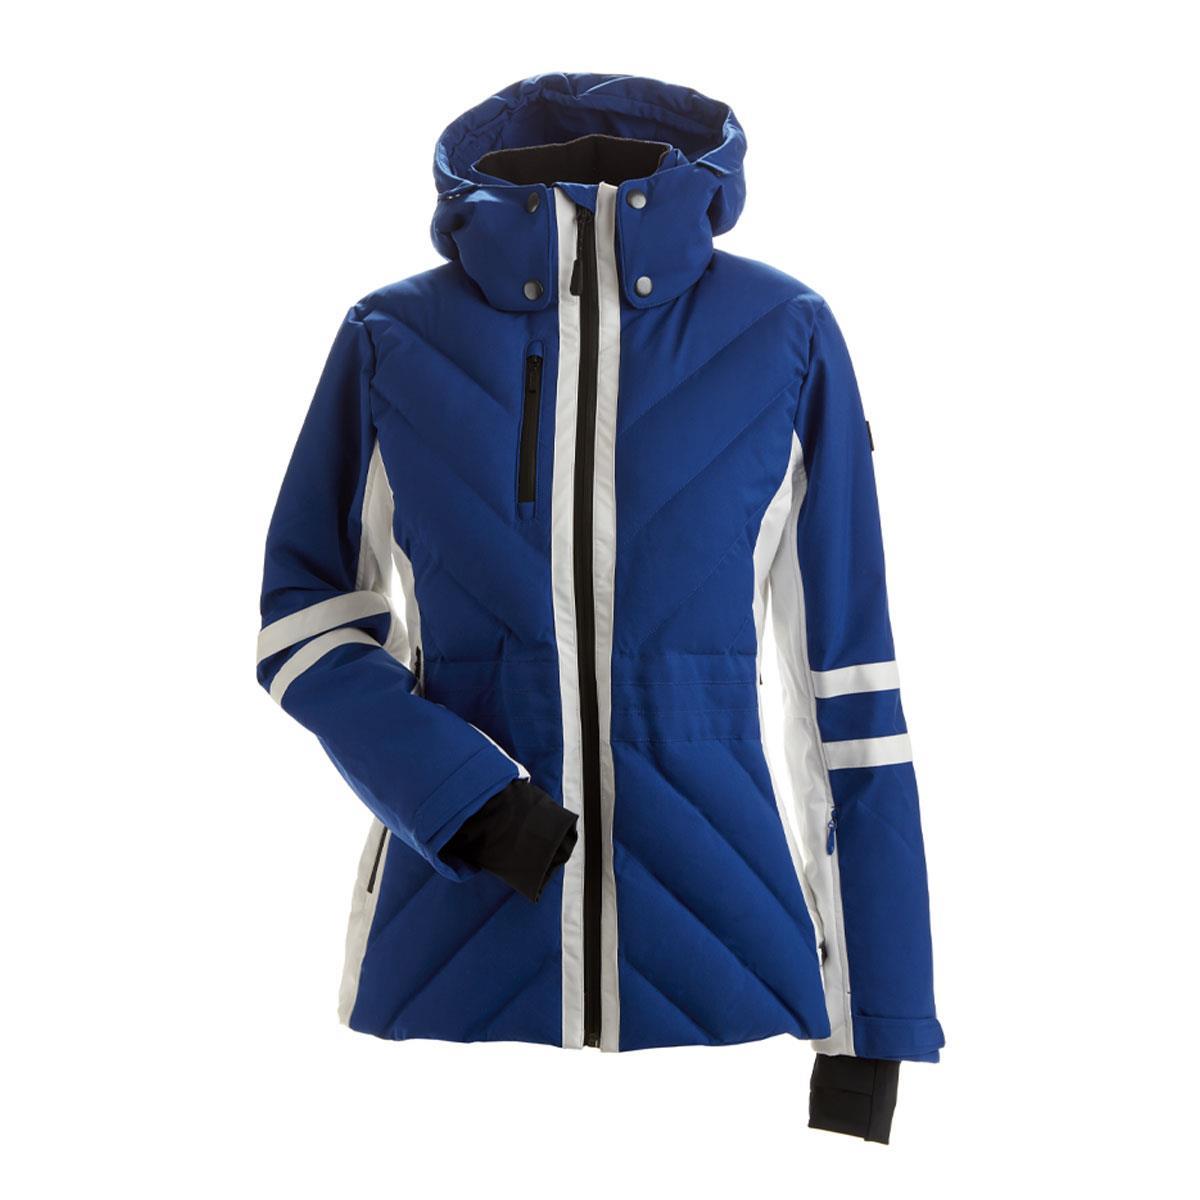 Womans Nil Ski Jacket. Price is firm - Athletic apparel